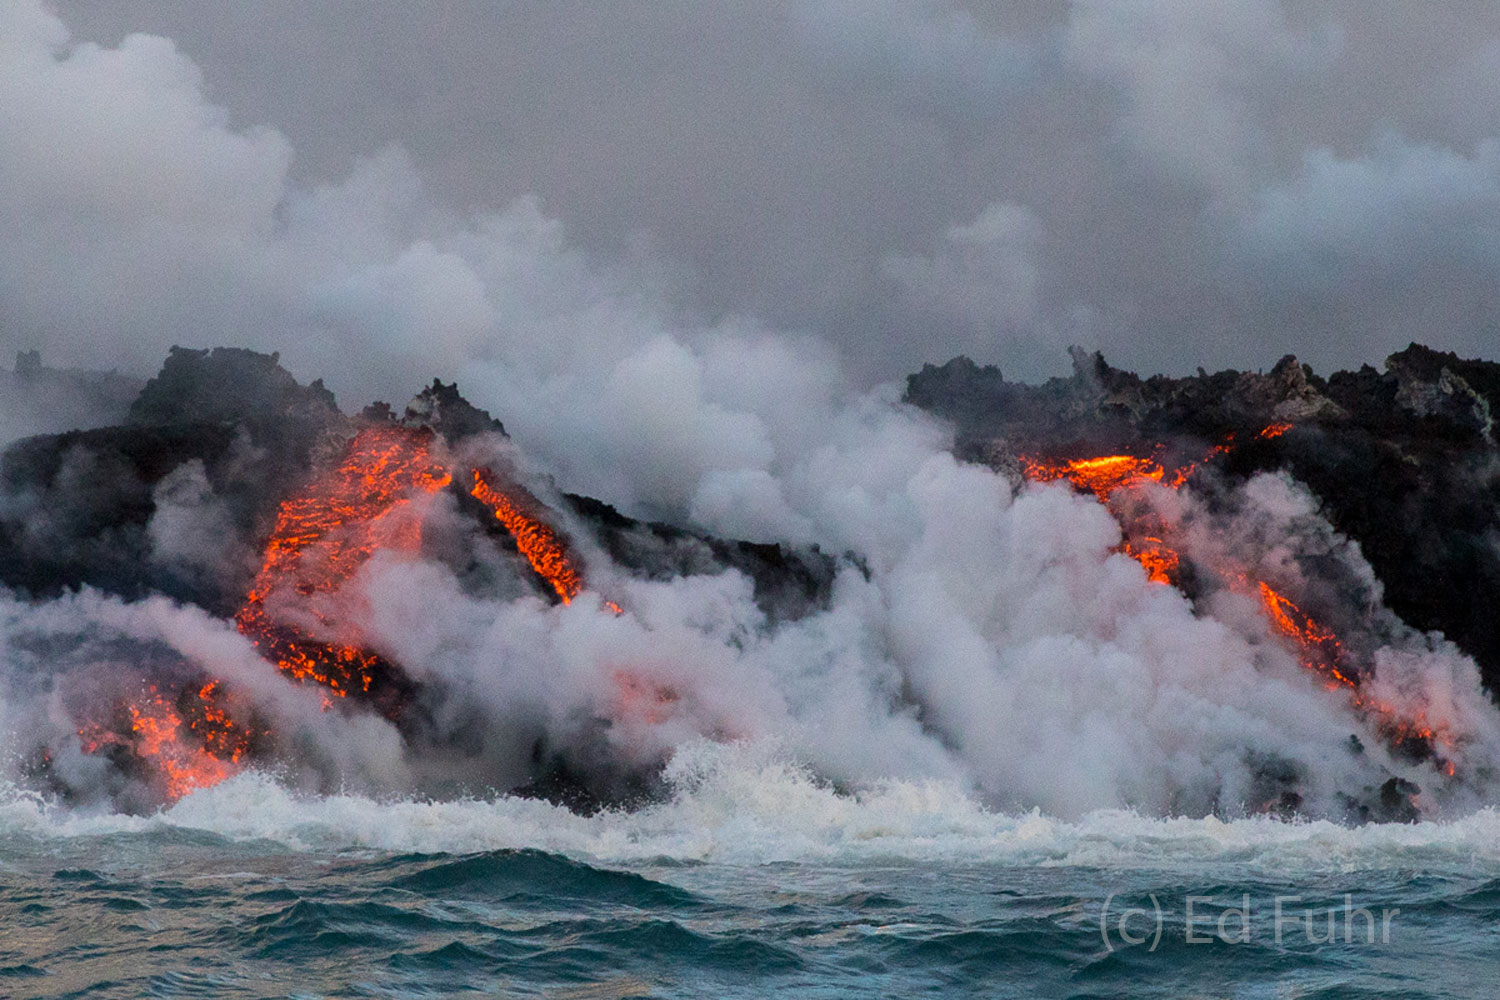 Hot steam rises from the molten lava as it enters the Pacific seas.